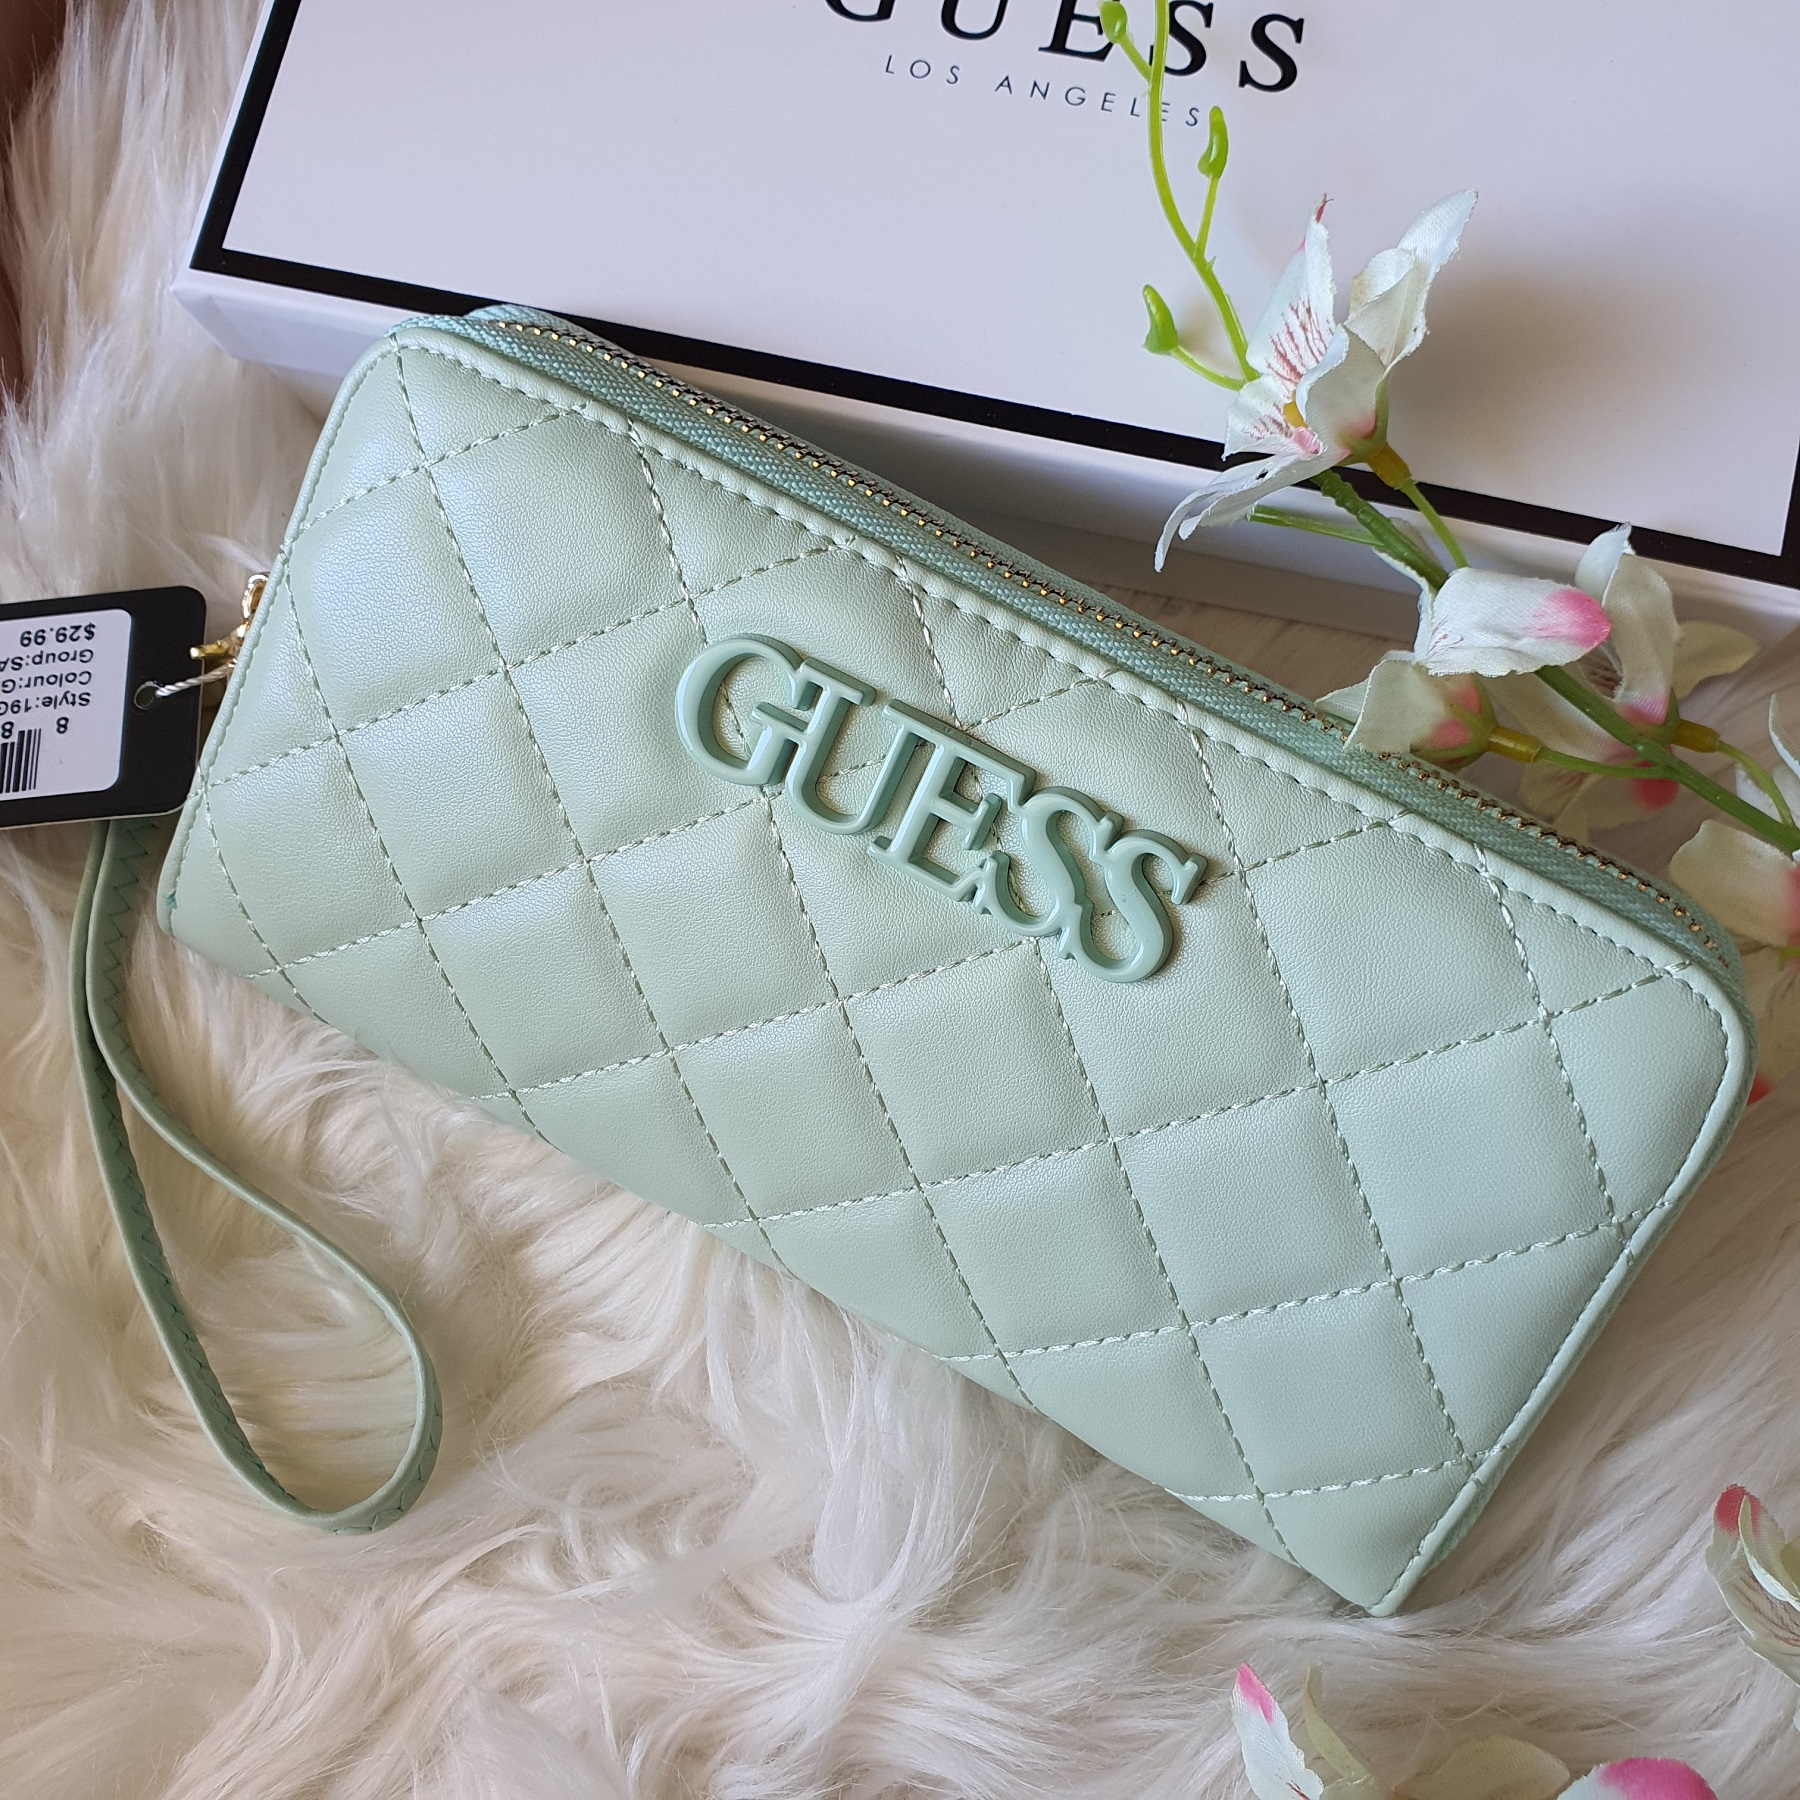 G by guess live chat